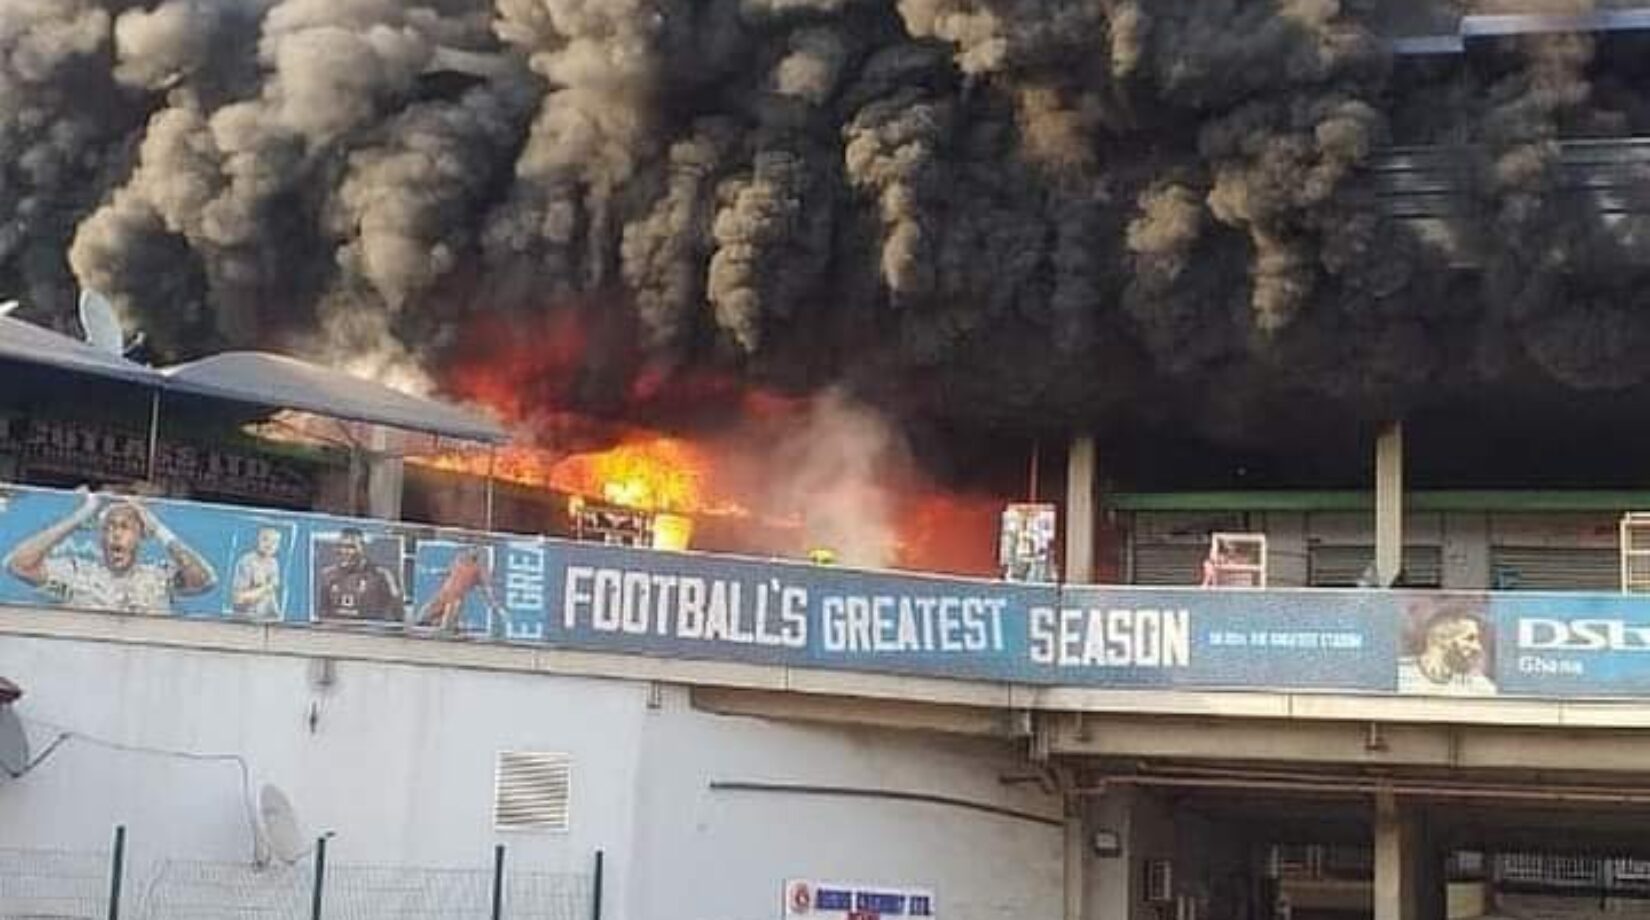 Kejetia Market fire:KMA,Managers ignored systematic flaws – report reveals